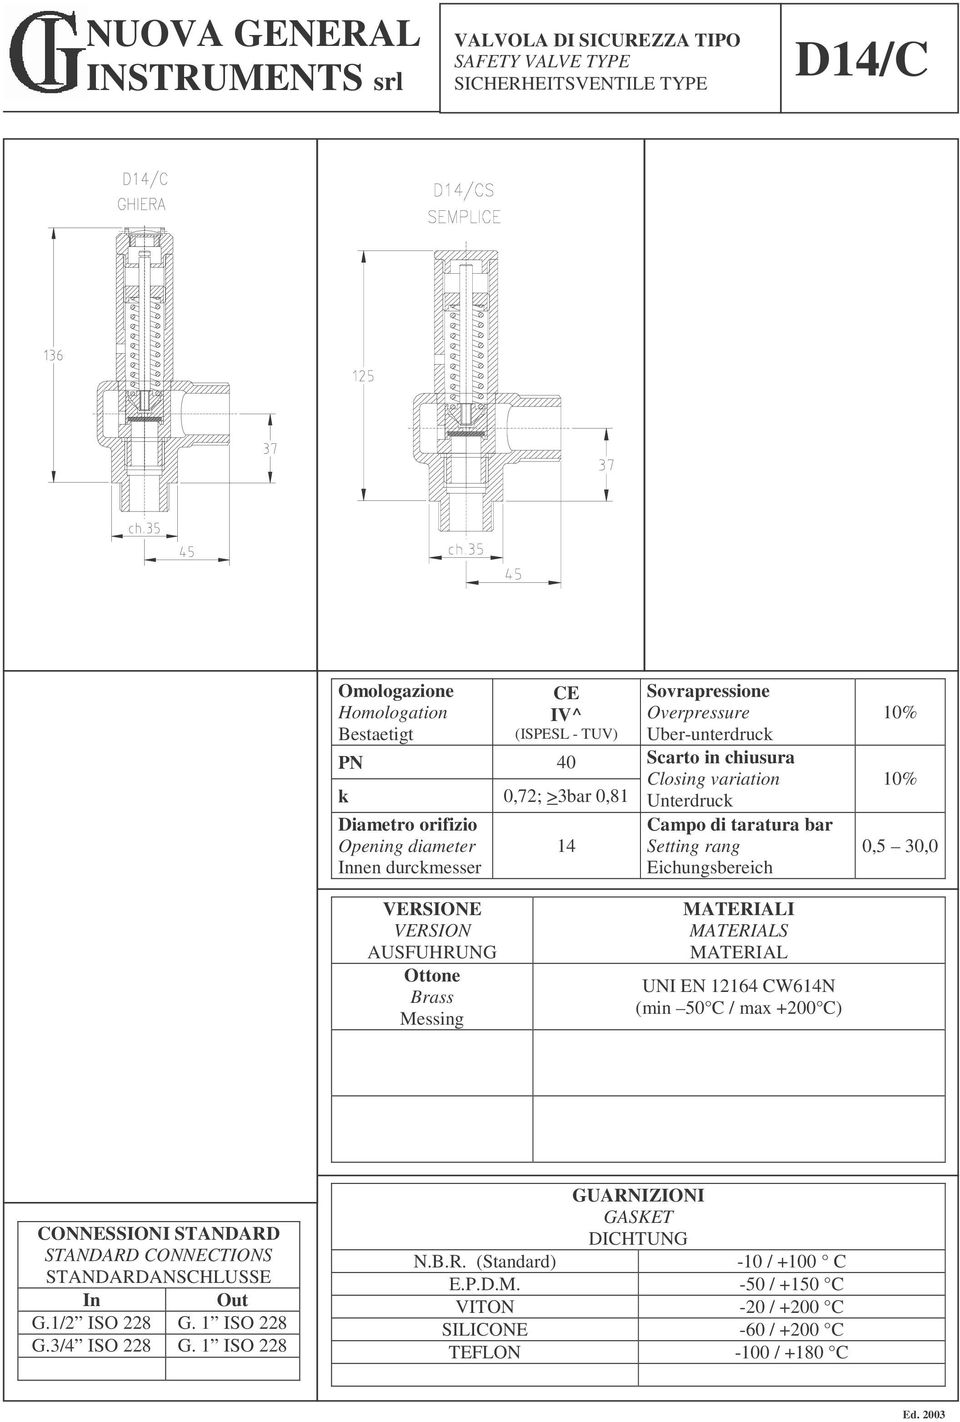 Eichungsbereich MATERIALI MATERIALS MATERIAL UNI EN 12164 CW614N 0,5 30,0 CONNESSIONI STANDARD STANDARD CONNECTIONS STANDARDANSCHLUSSE G.1/2 ISO 228 G.